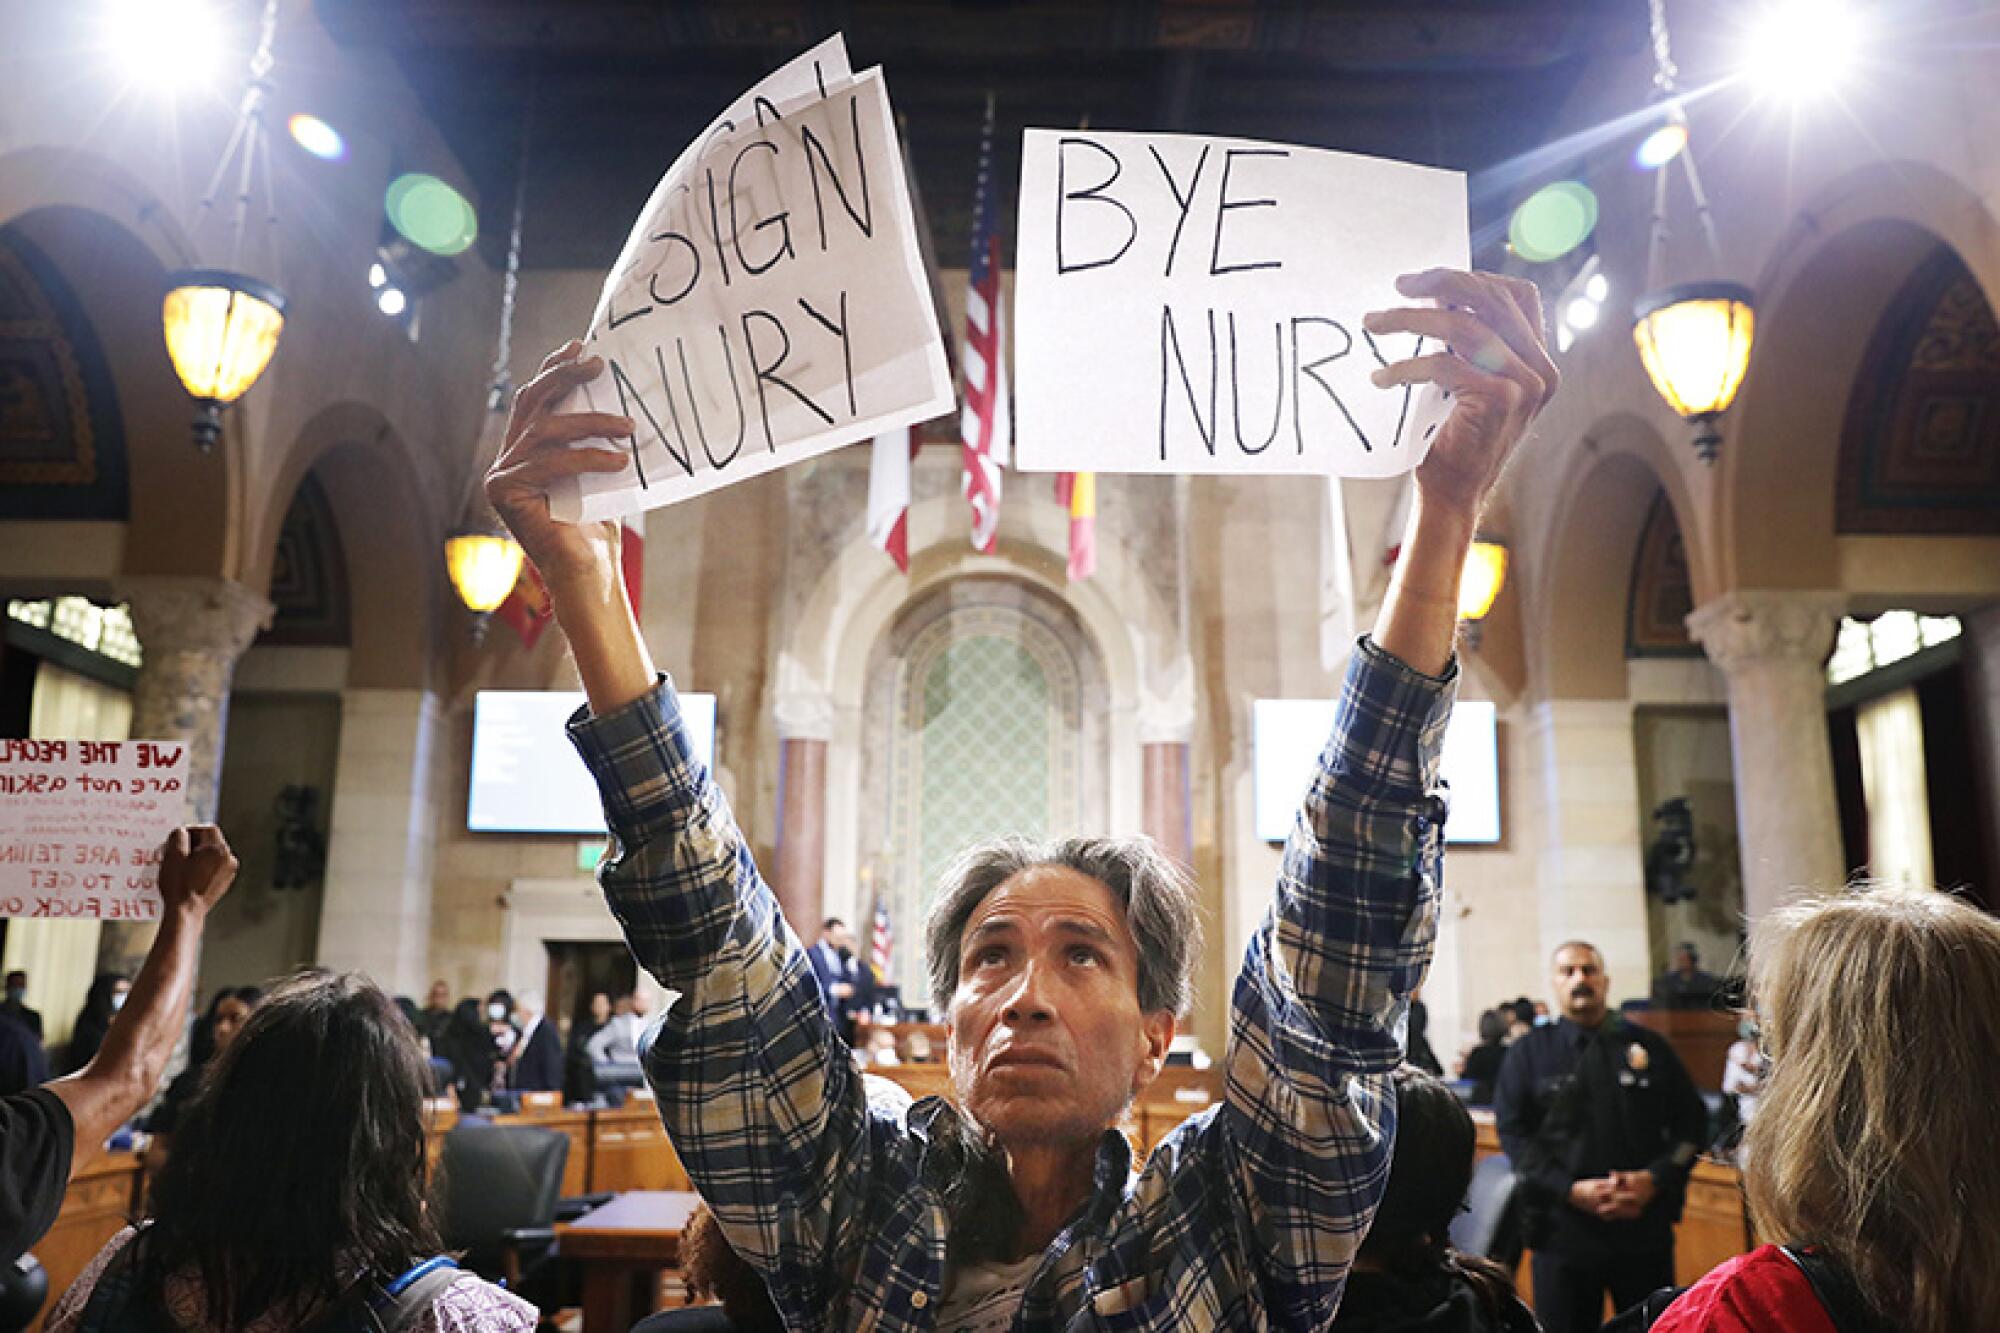 A protester at a council meeting holds up signs that say "Resign Nury" and "Bye Nury"